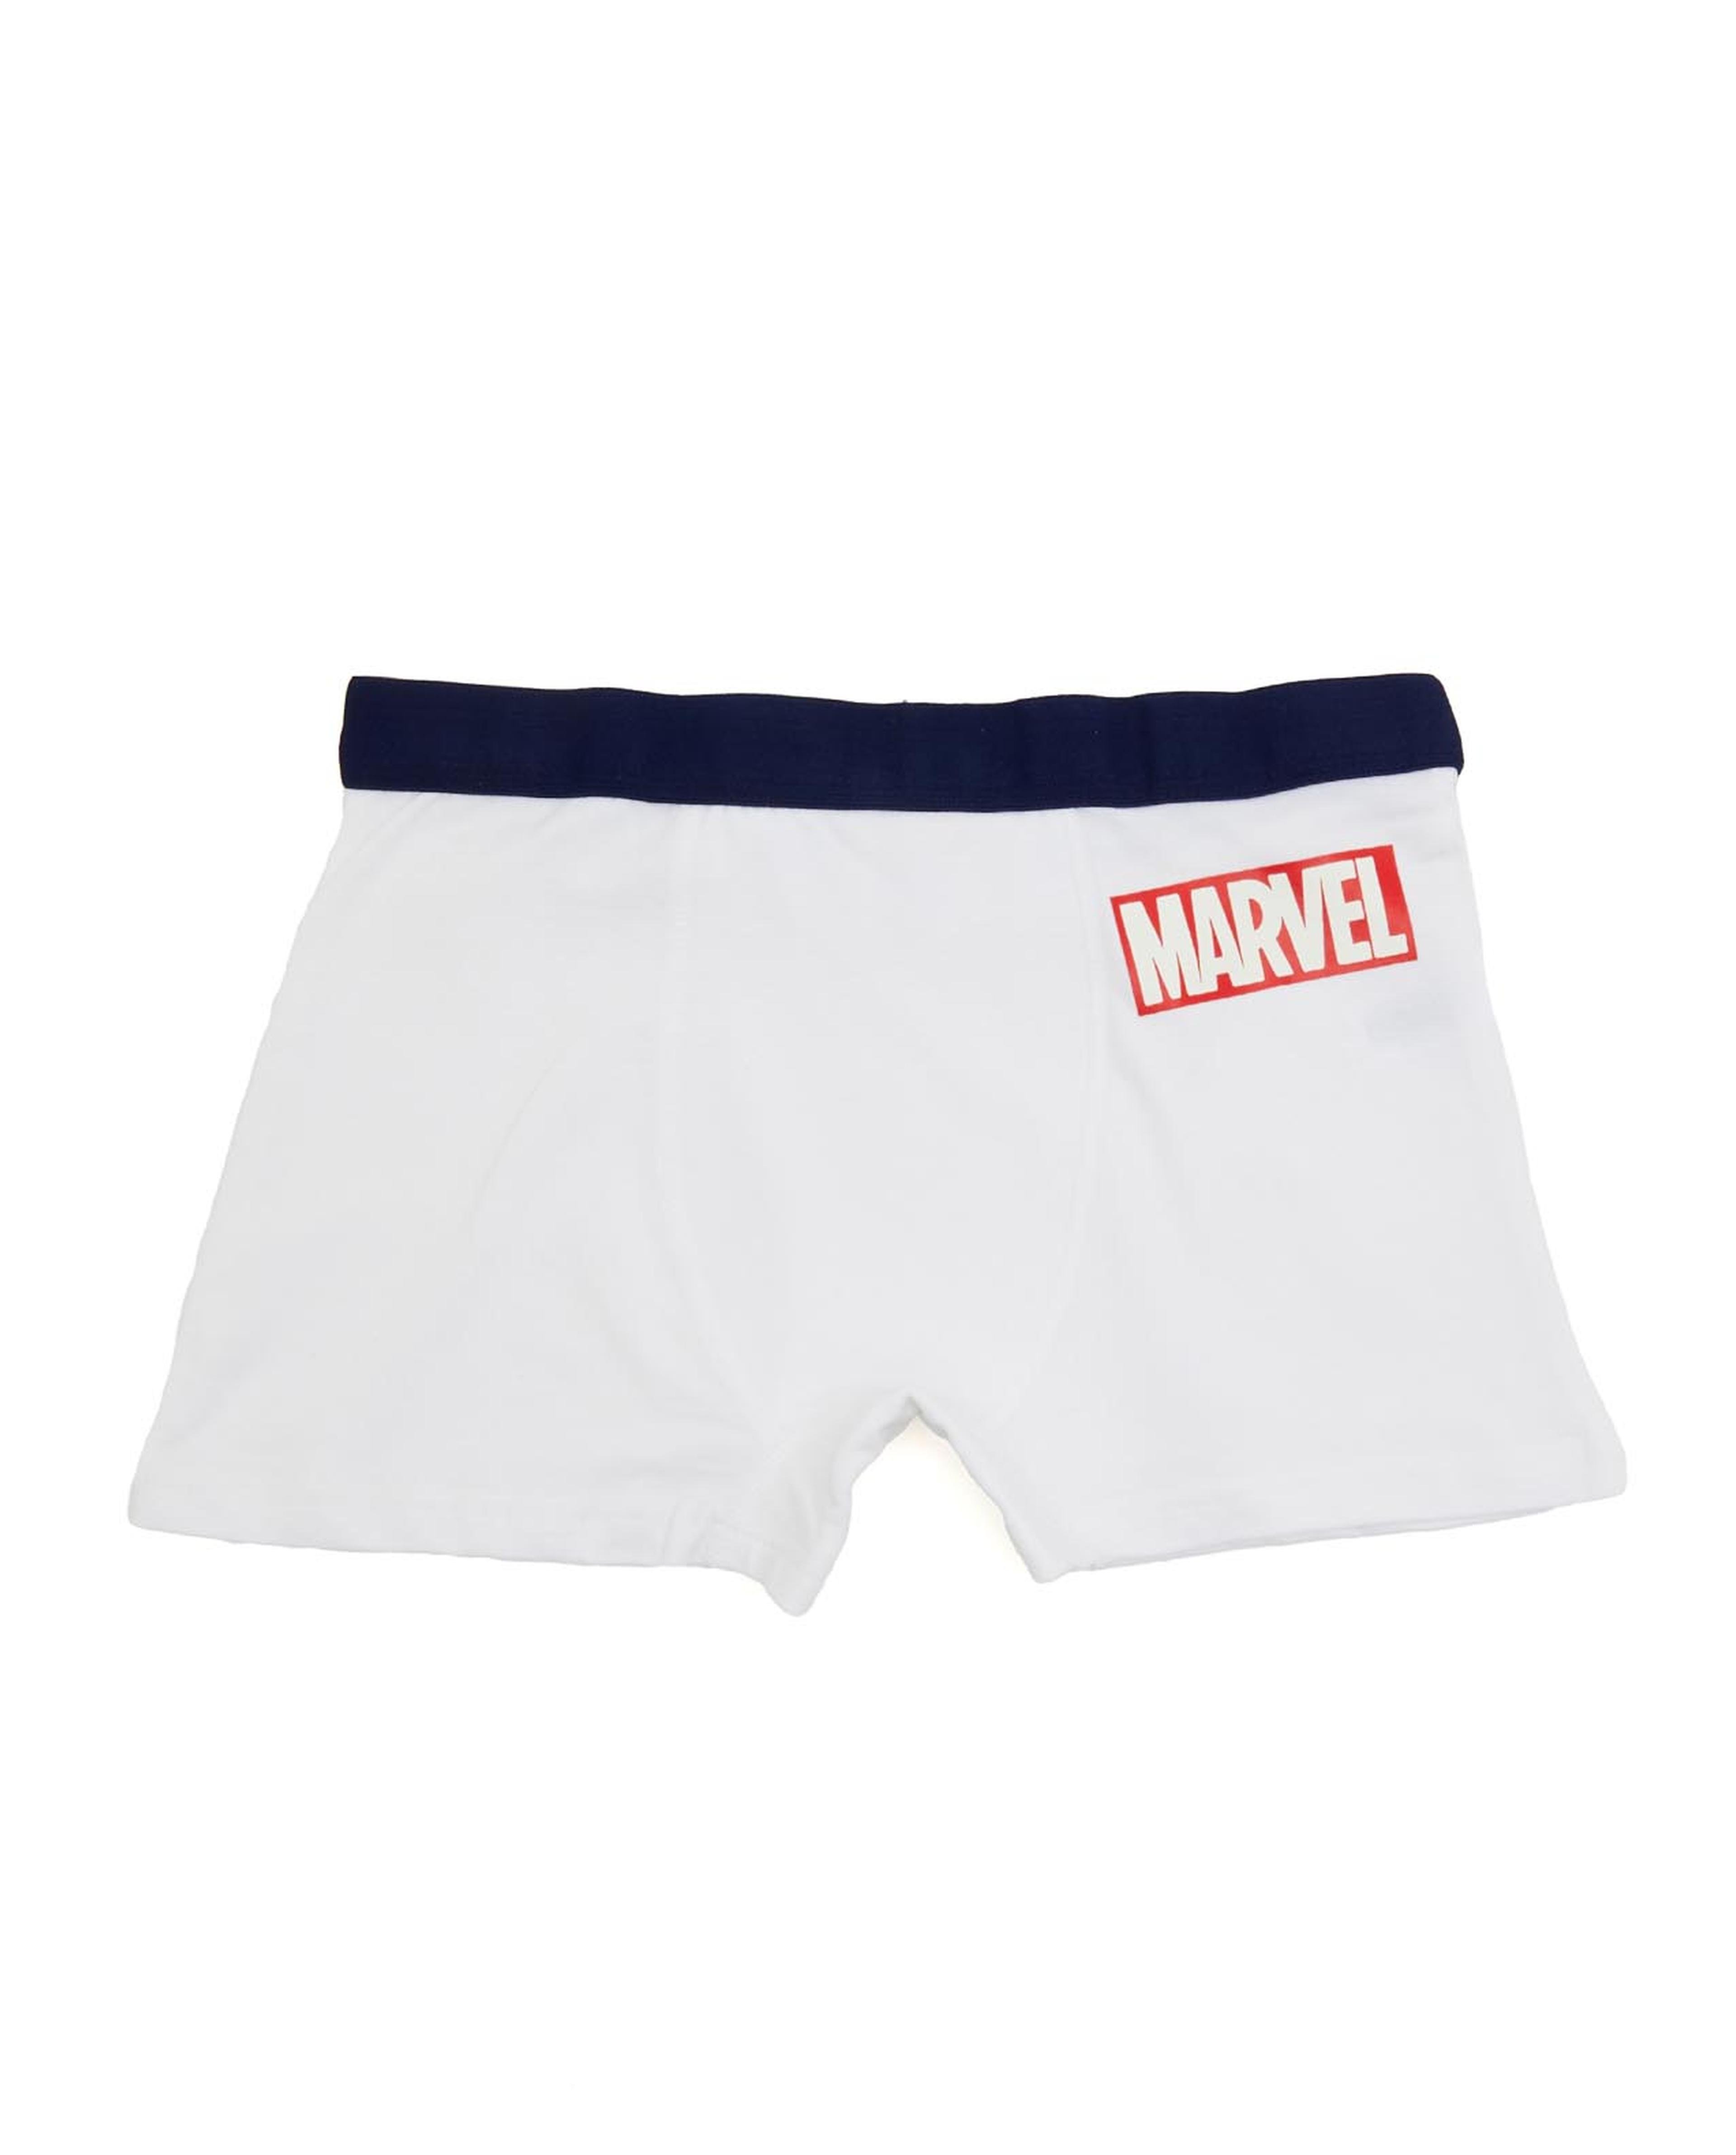 Pack of 3 Avengers Printed Briefs